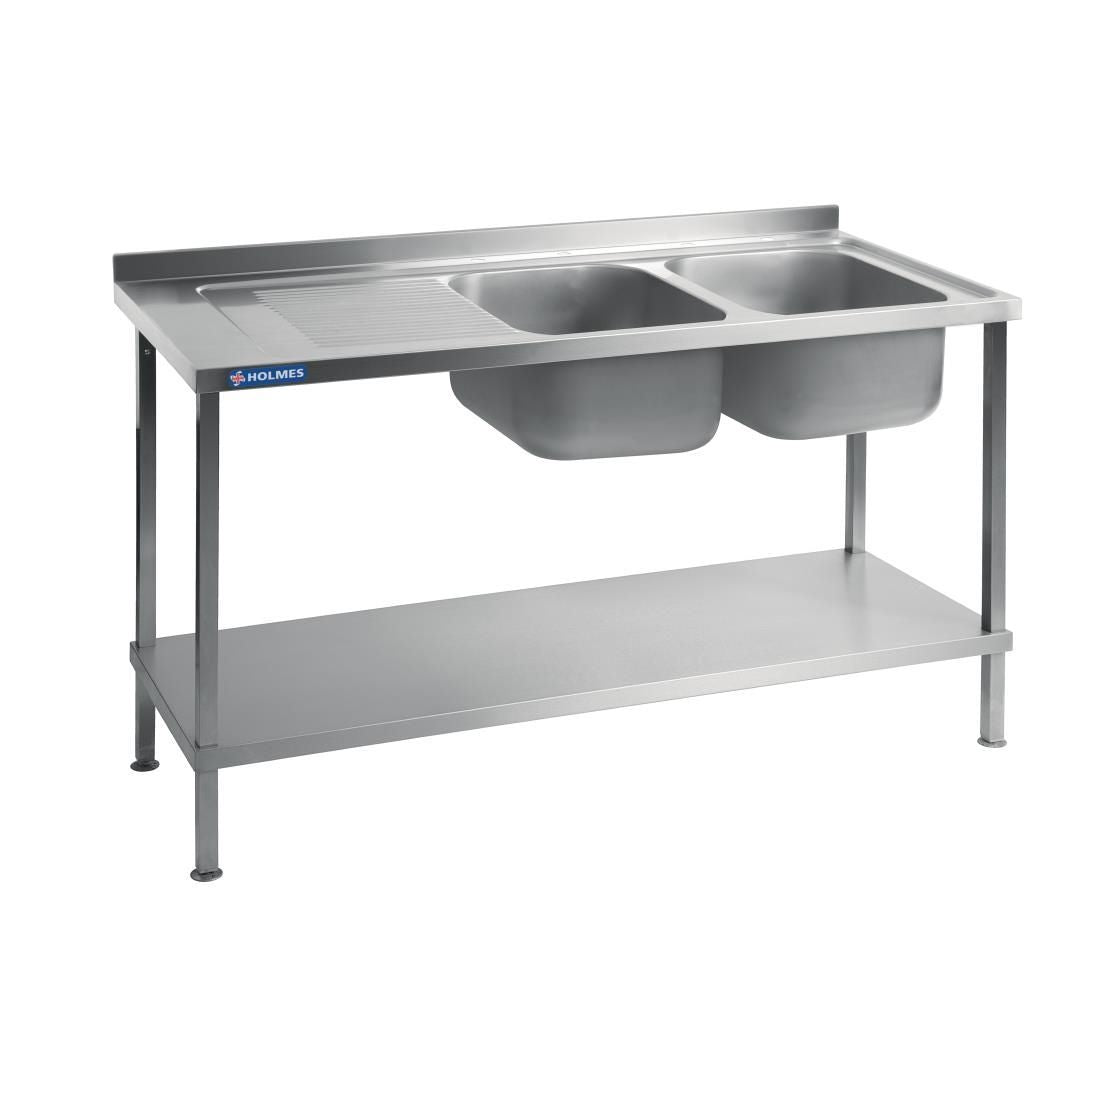 Holmes Self Assembly Stainless Steel Sink Left Hand Drainer 1800mm - DR375